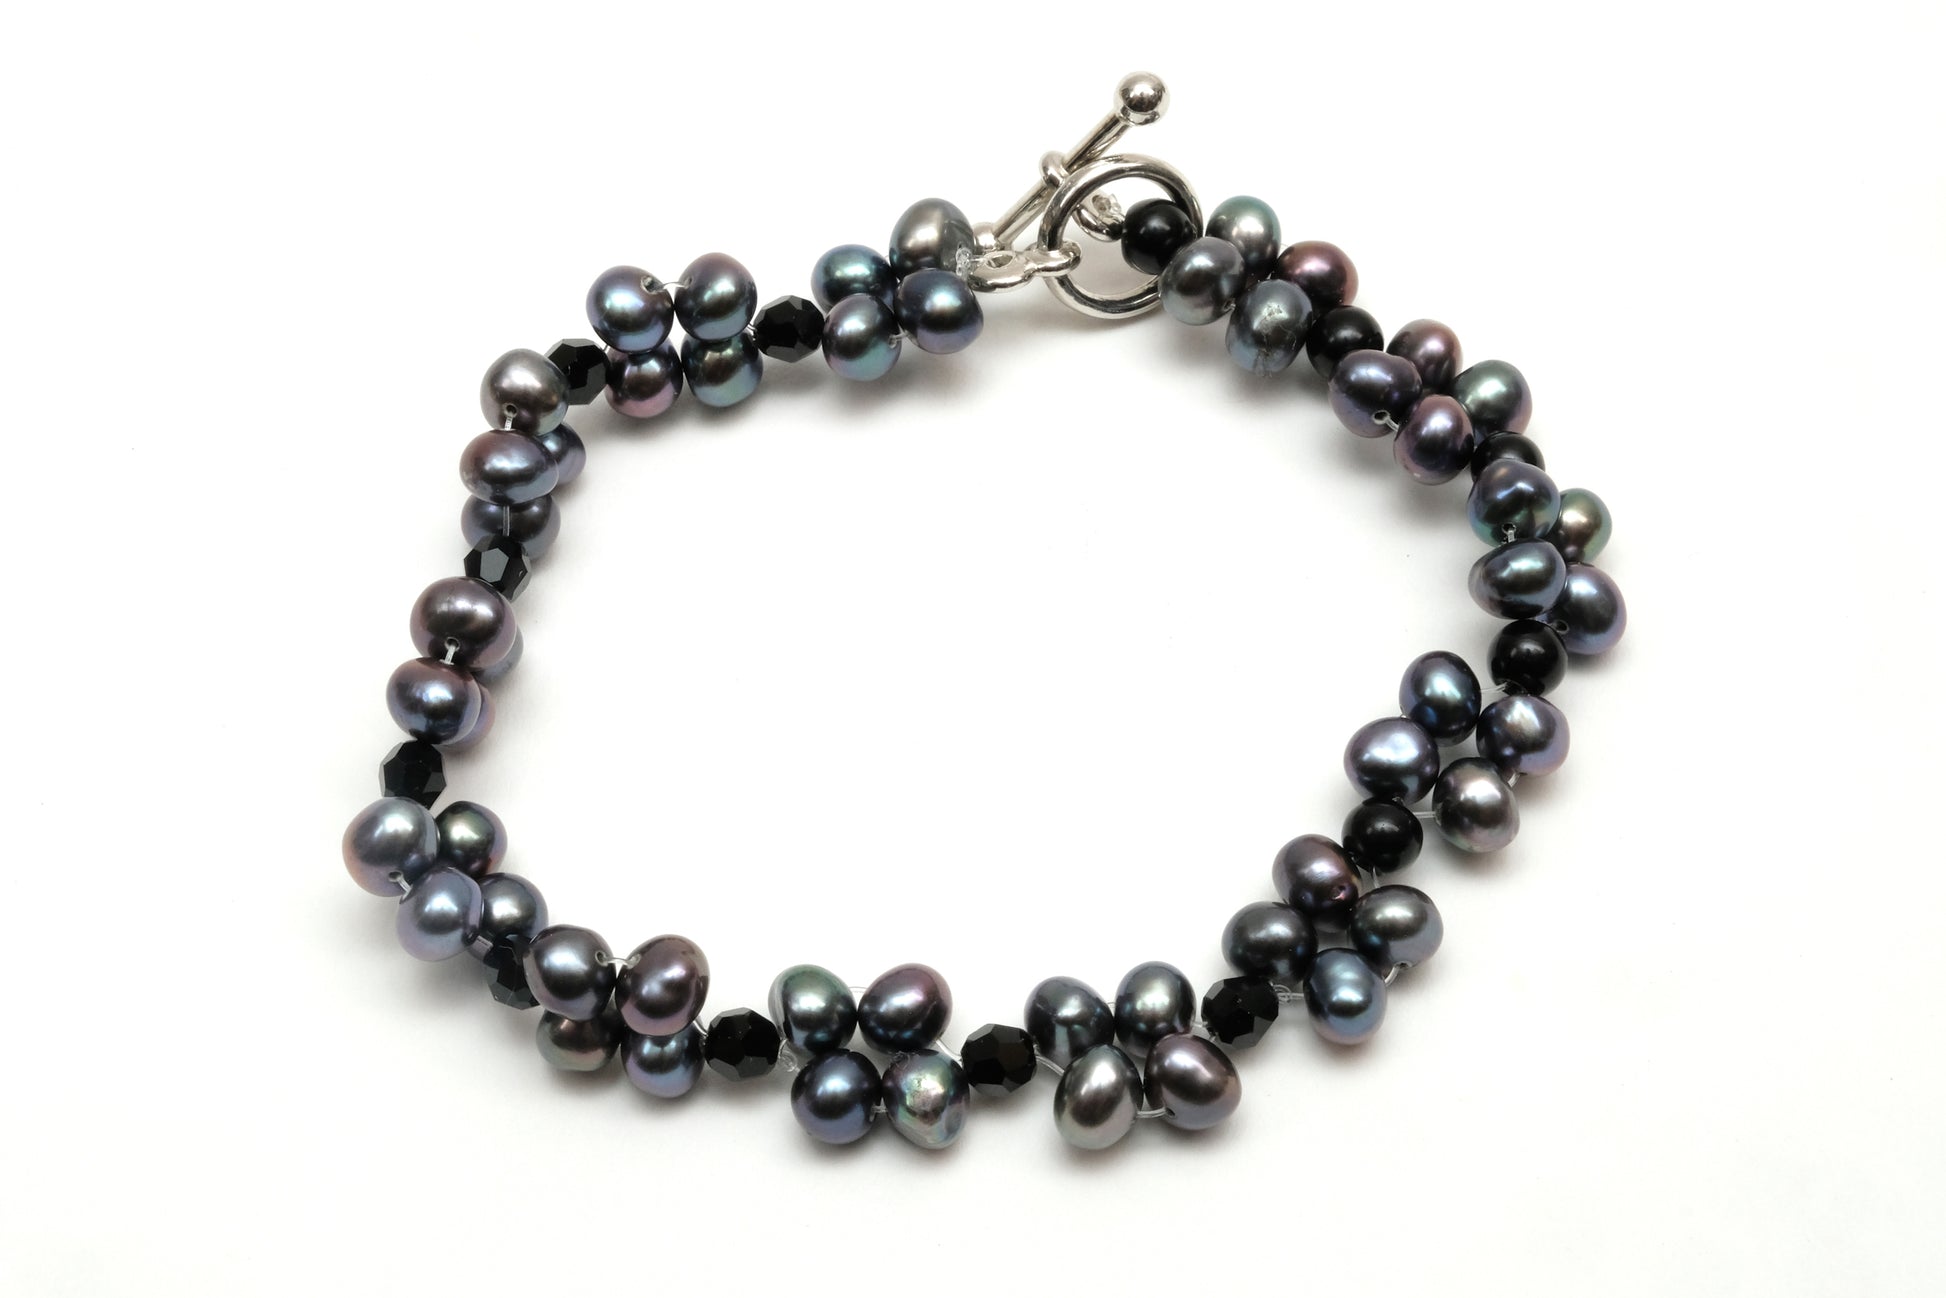 Dewi Maya Jewelry Bracelet made of black stones available at the best boutique in Upstate South Carolina Spartanburg Greenville Dewi Maya Boutique